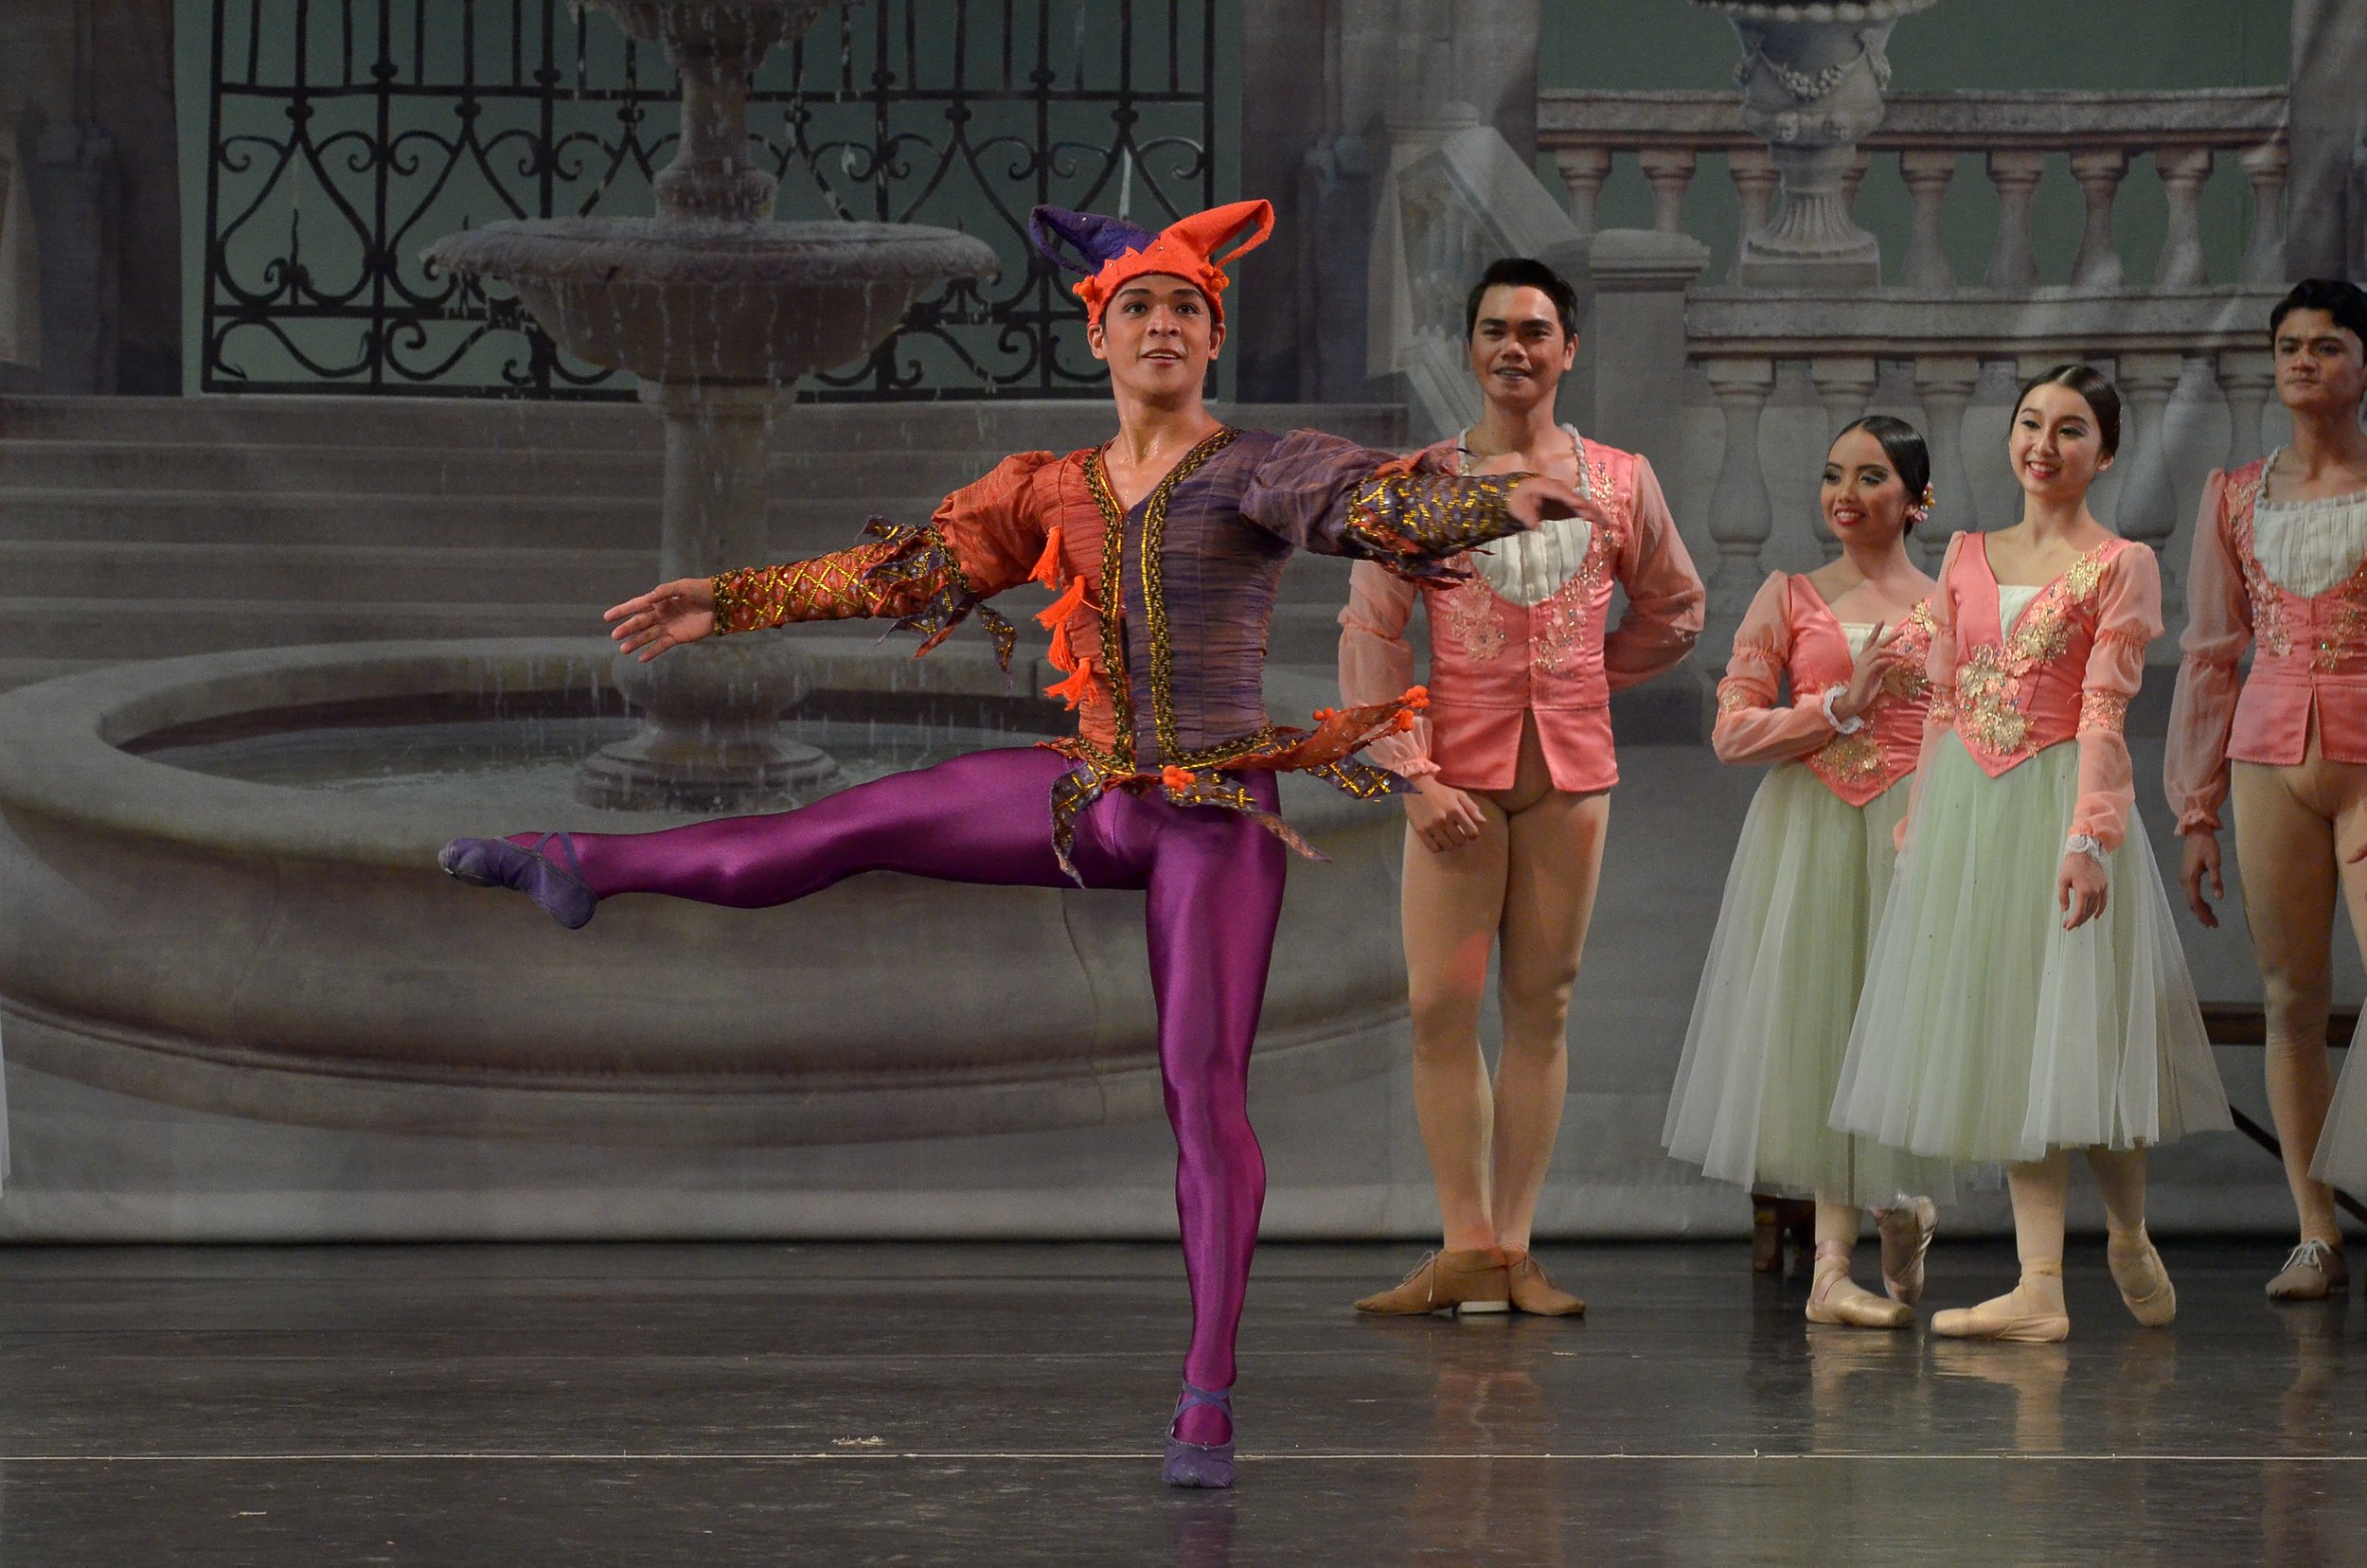    As the Jester in  Swan Lake  (2017), Gerardo Francisco draws attention not just with his antics but his get-up which is in a combination of attractive colors, including wine-colored tights and a pair of purple shoes. Photo by Ocs Alvarez   